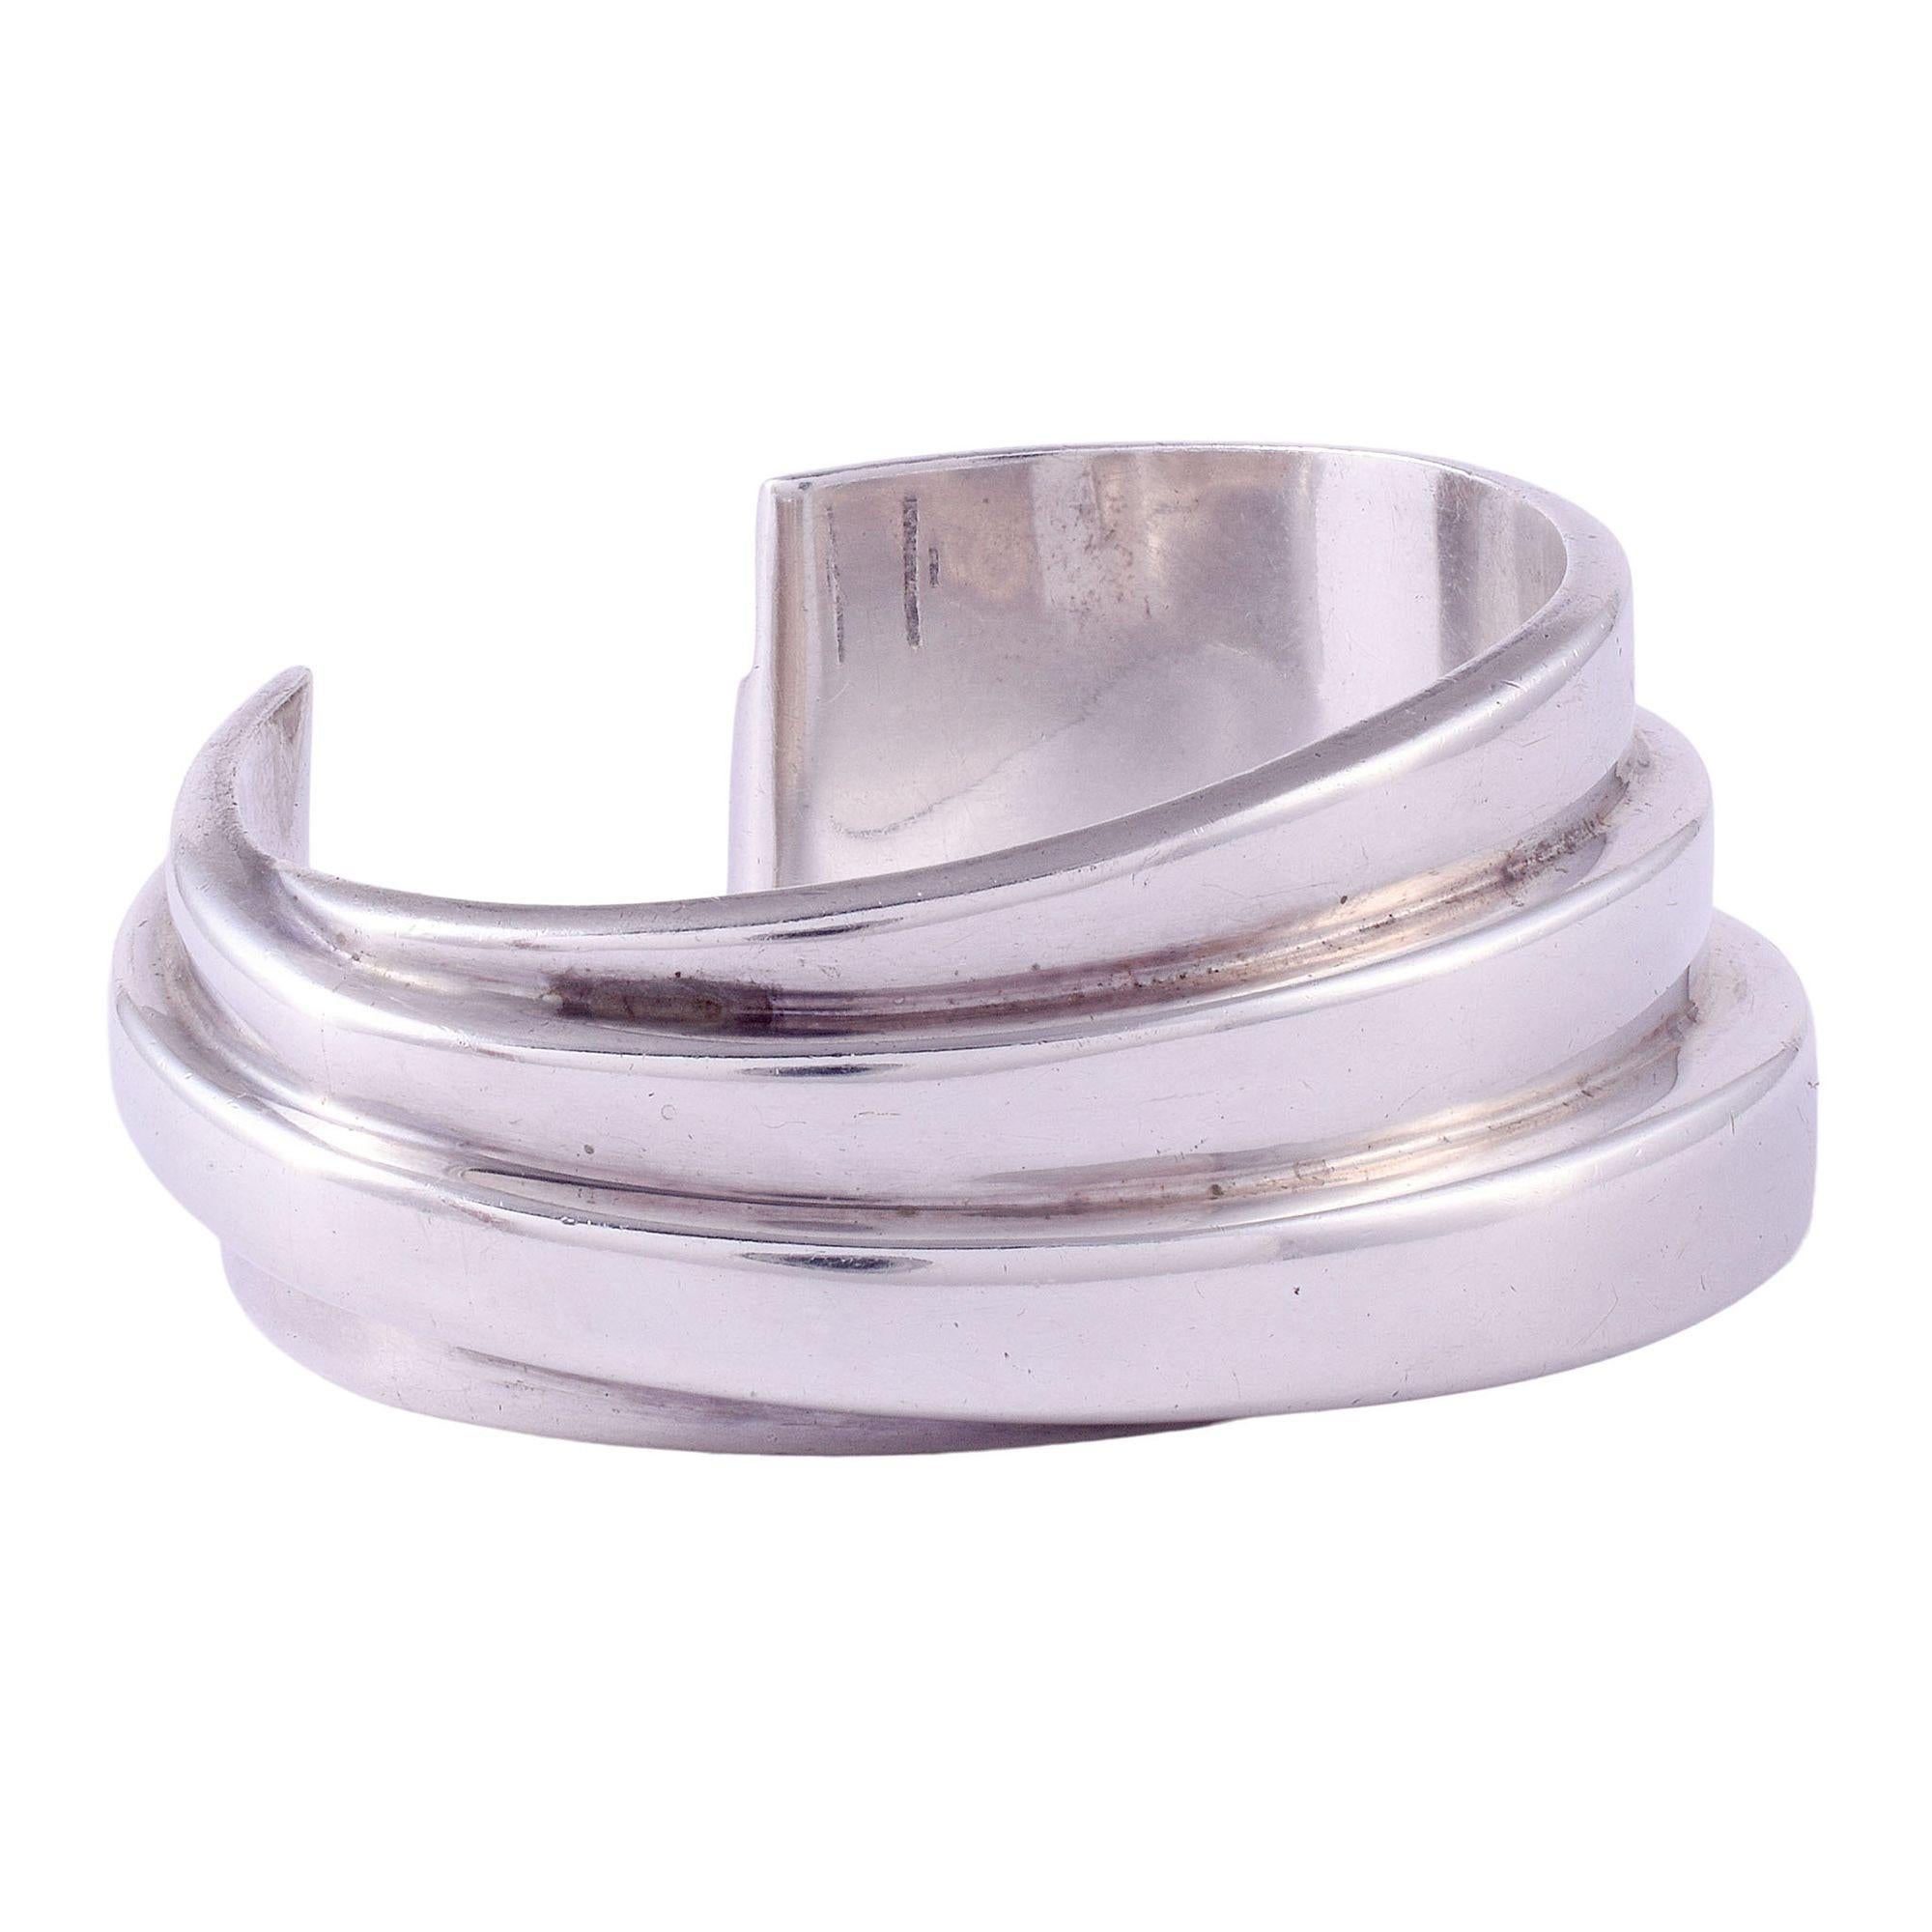 Estate American Bayanihan sterling silver cuff bracelet. This wide cuff bracelet is crafted in sterling silver and signed Bayanihan. The designer cuff bracelet weighs 55 grams. [SJ 1011 P]

Dimensions
2.5